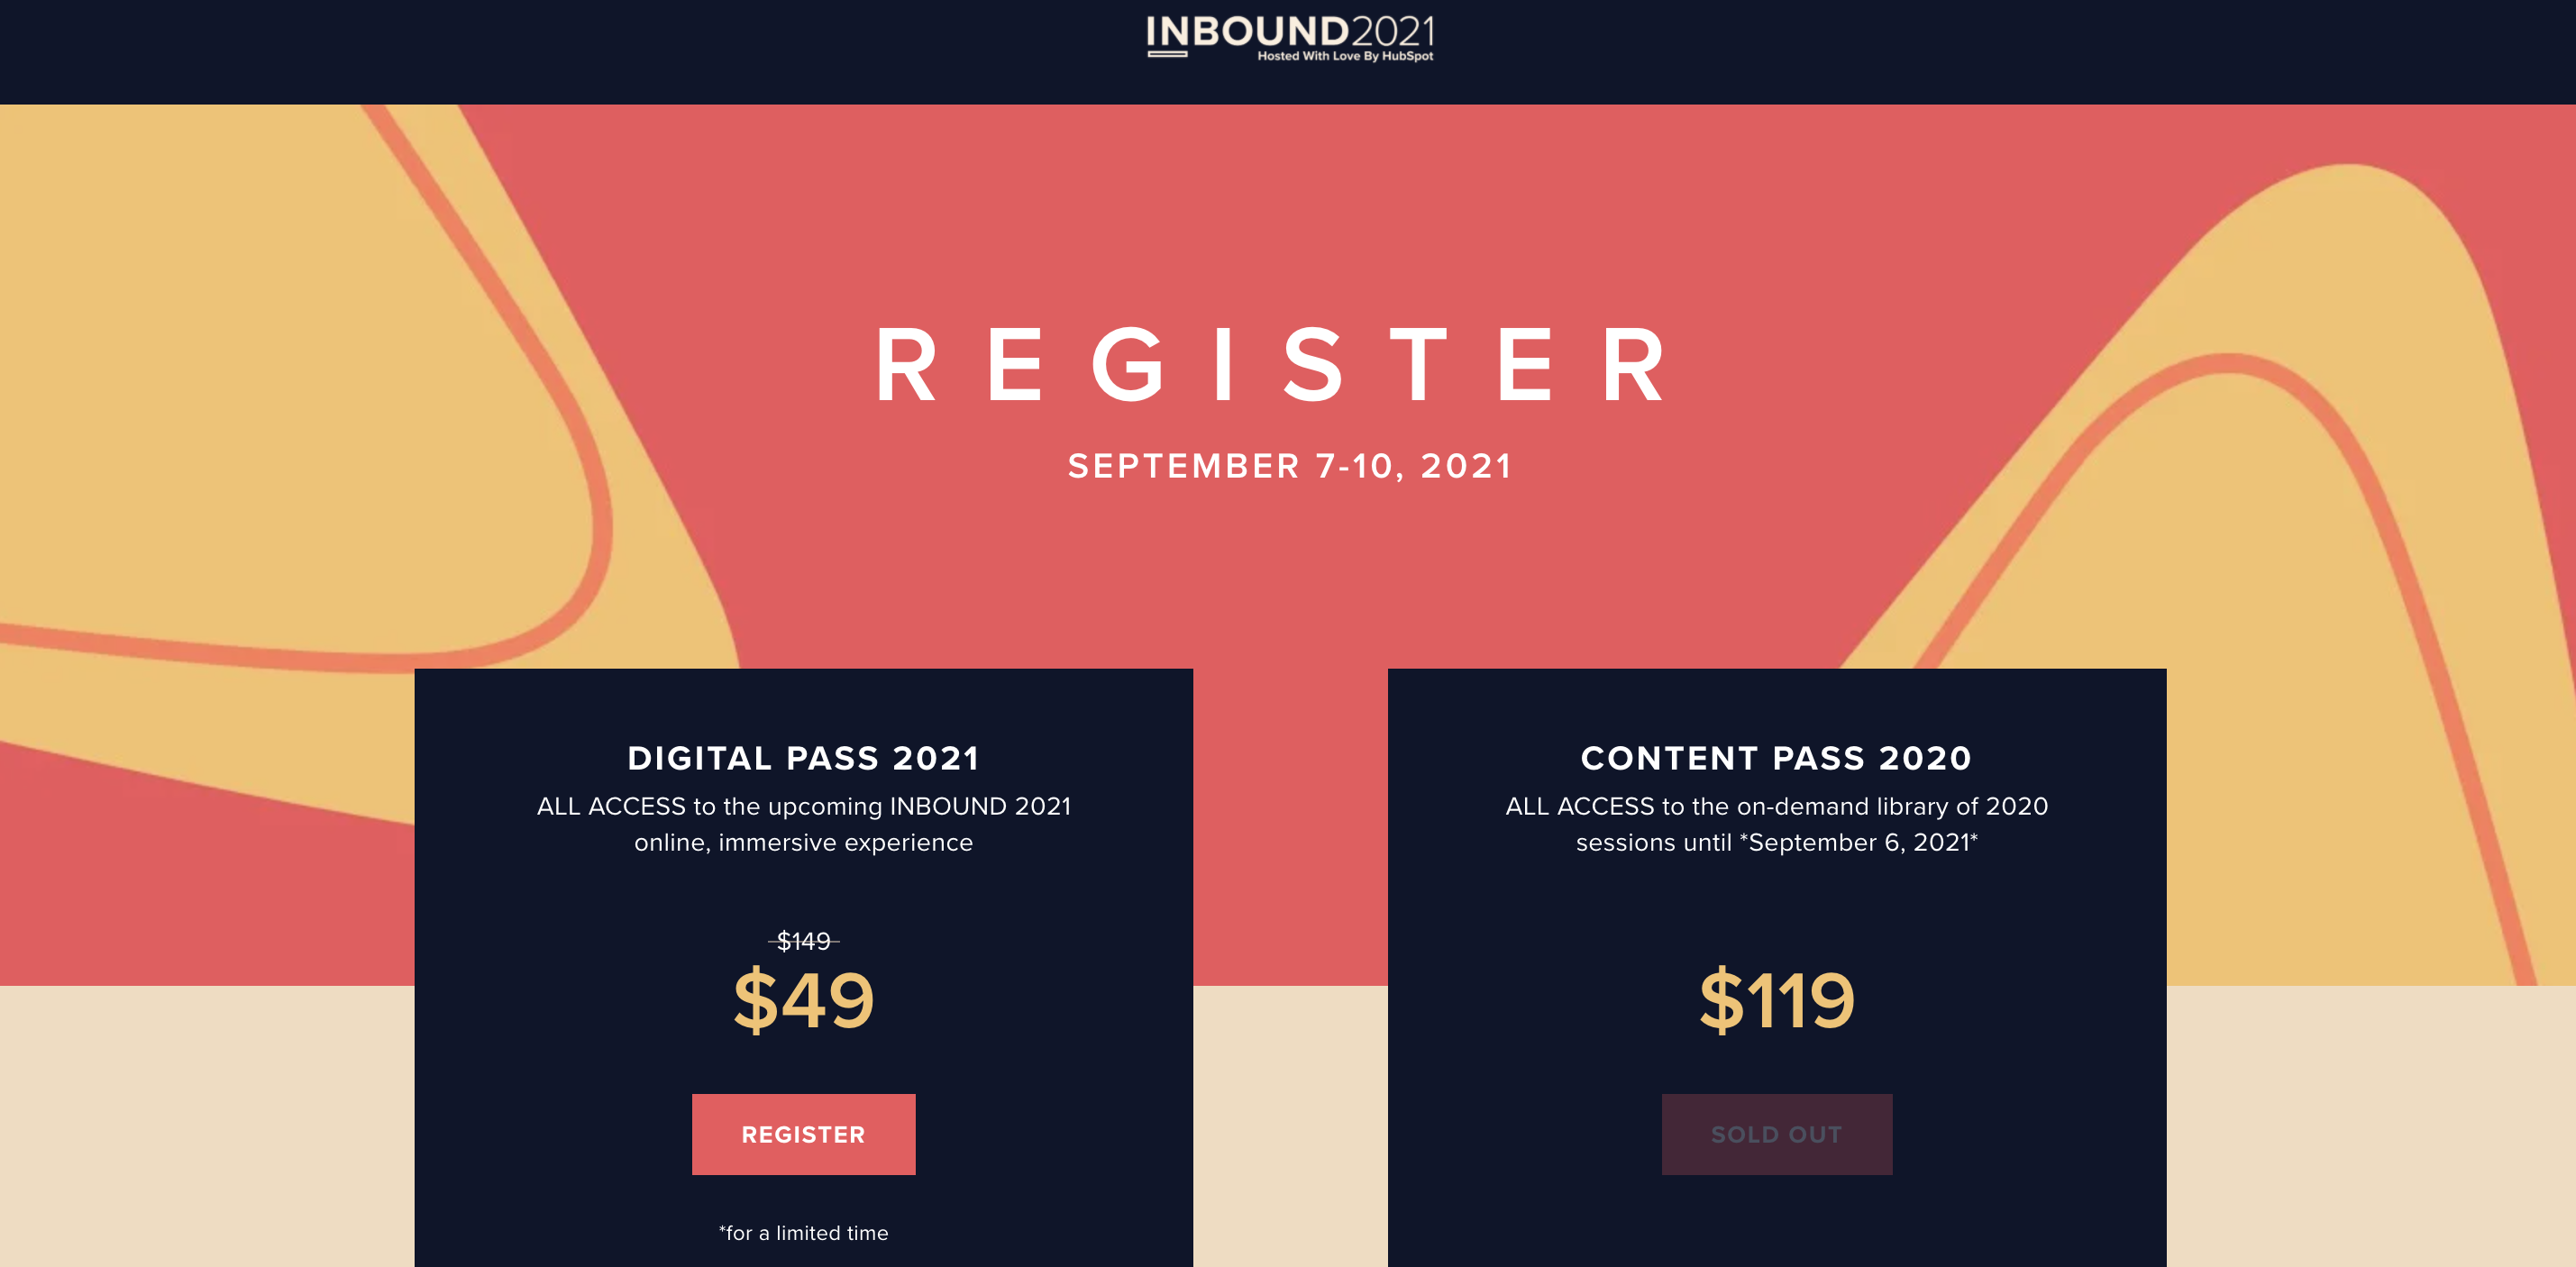 Pricing Strategy Example: value-based pricing strategy for INBOUND